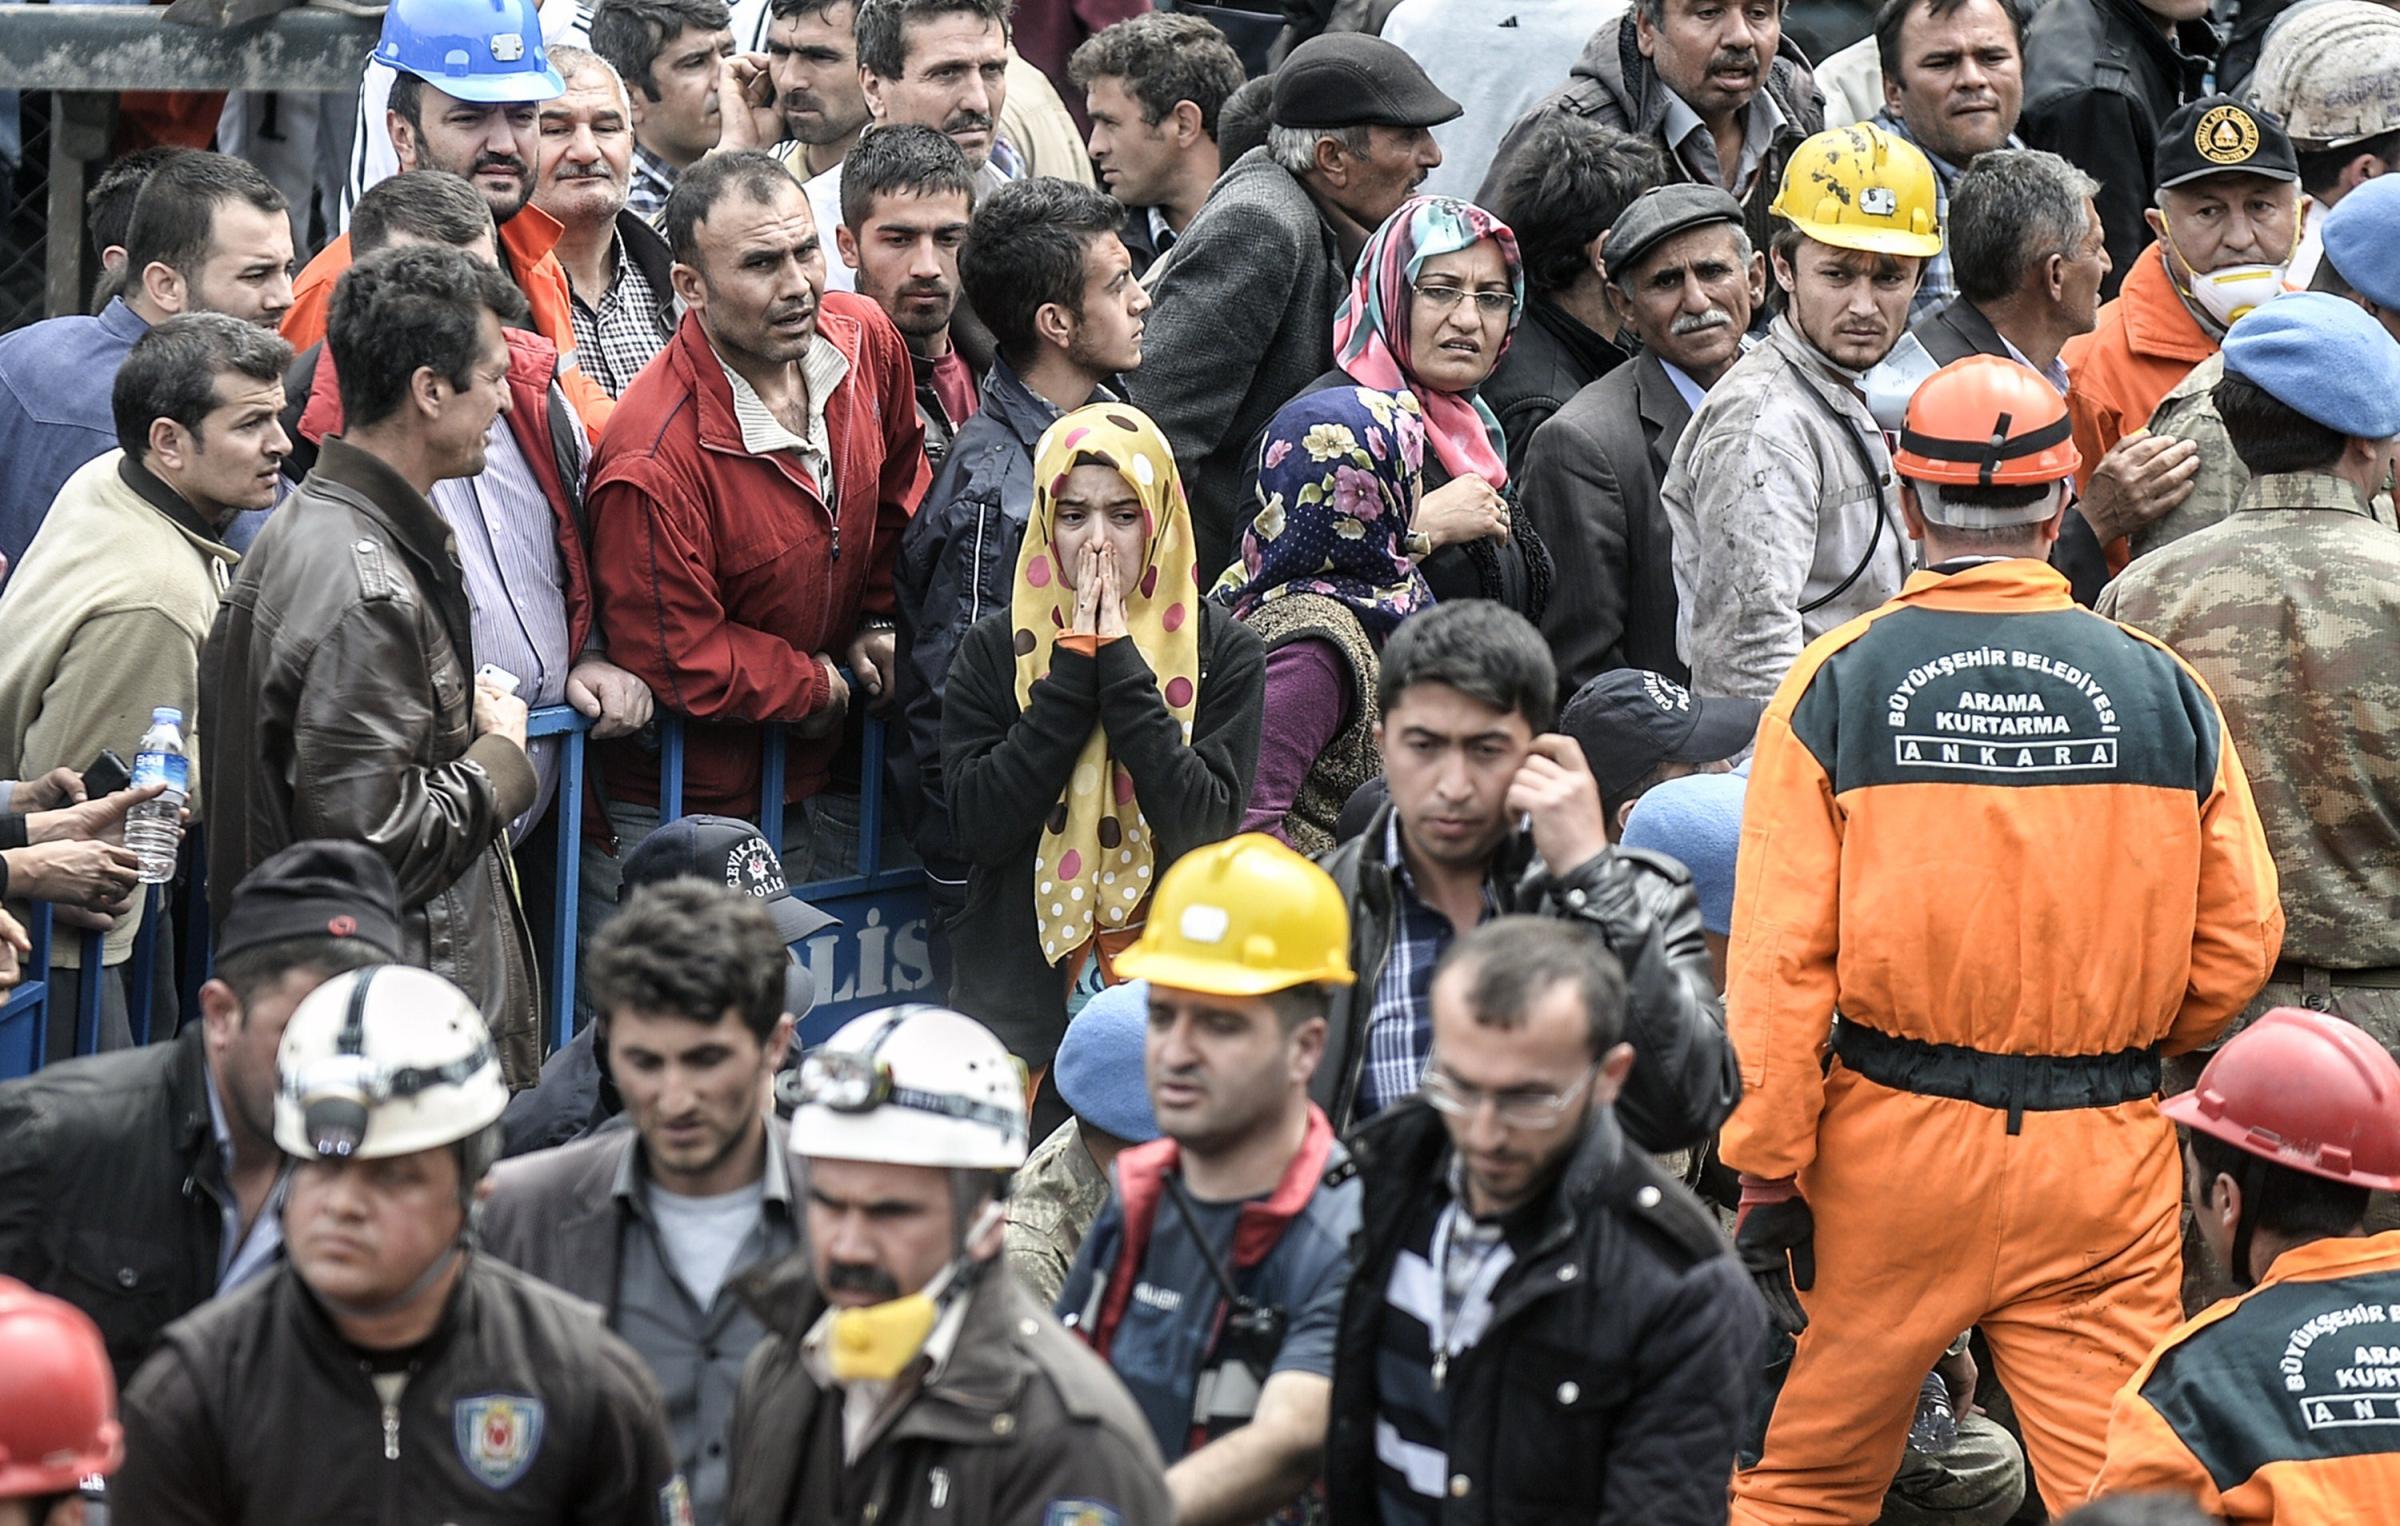 People gather, searching for their relatives, as rescuers carry out bodies of dead miners on May 14, 2014 after an explosion and fire in a coal mine in the western Turkish province of Manisa.